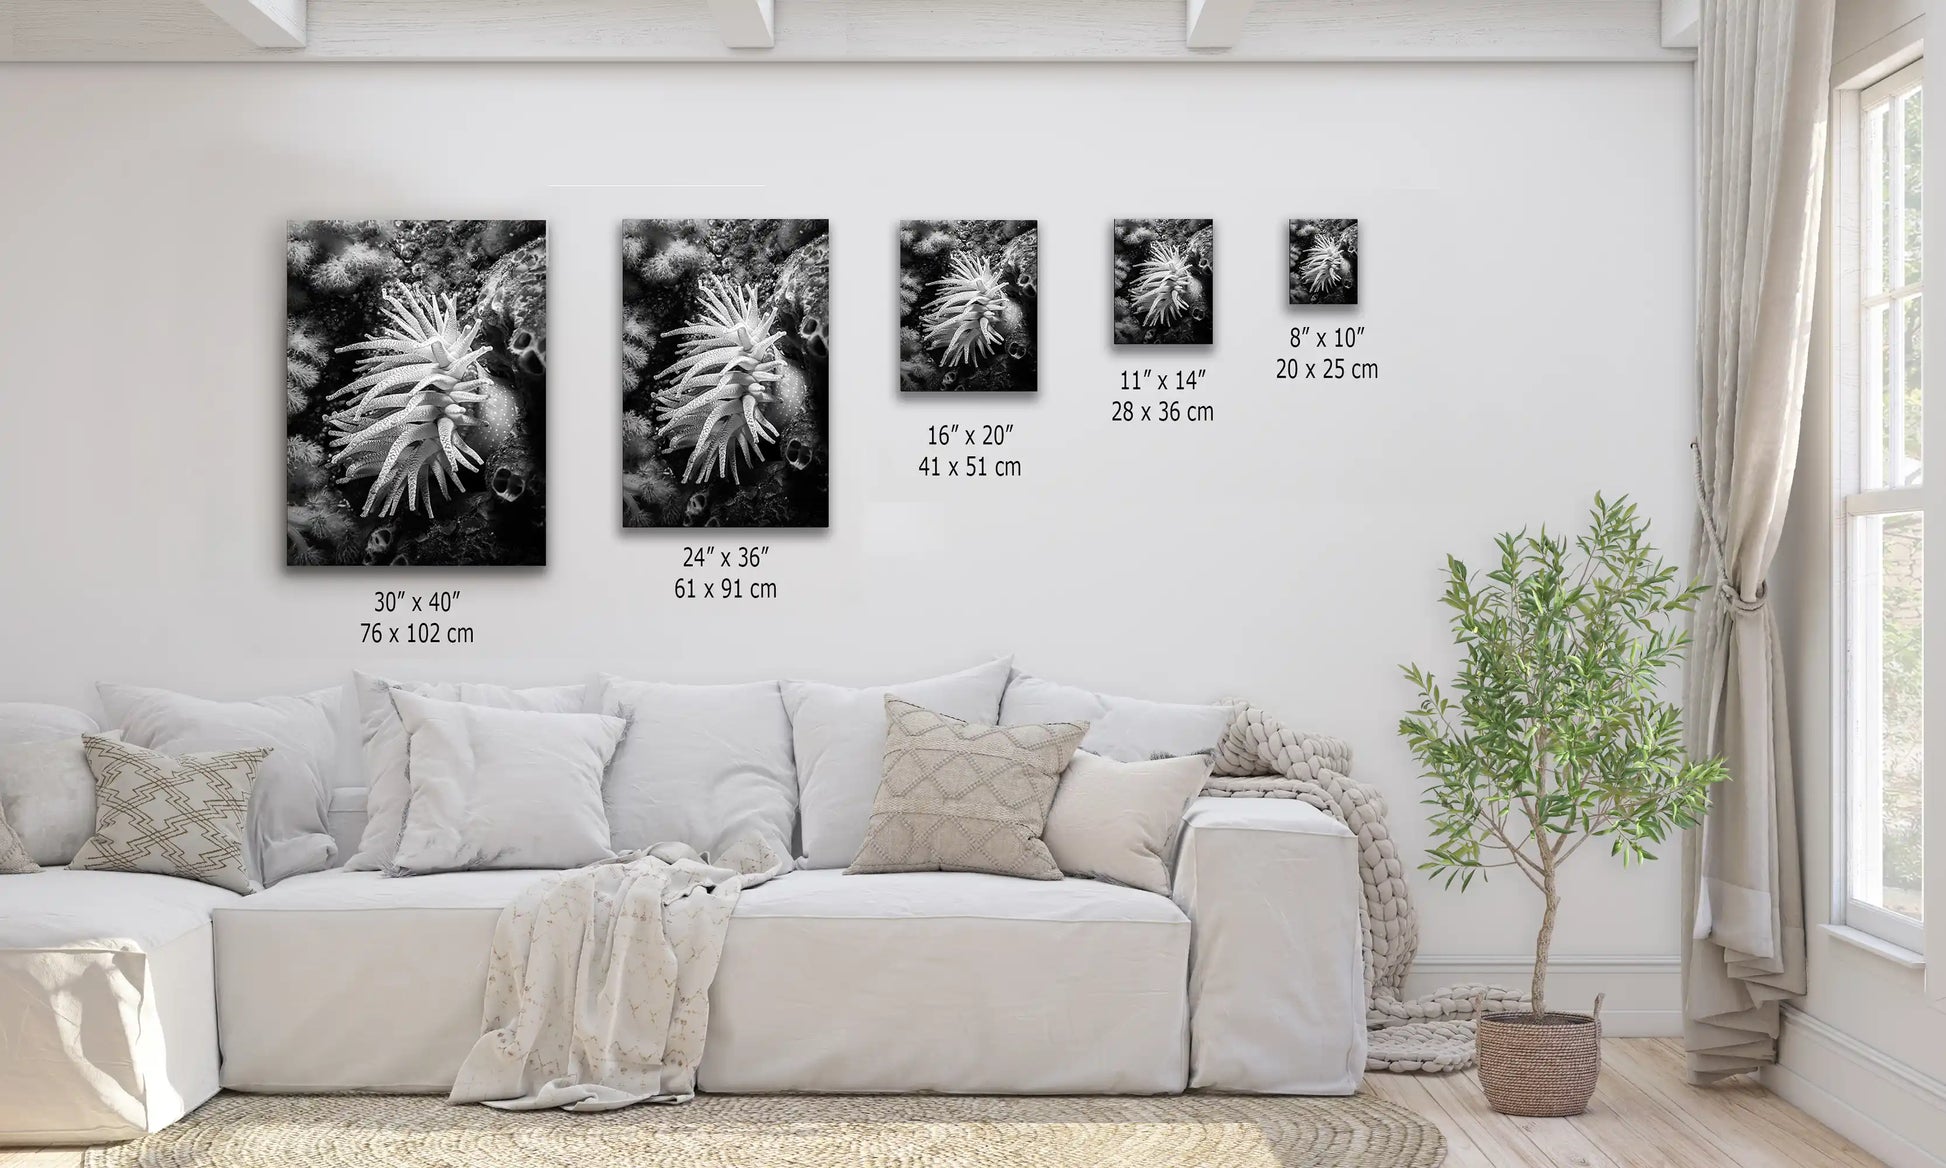 Various sizes of black and white canvas prints of a Crimson Anemone displayed over a couch, showing scale and arrangement options.